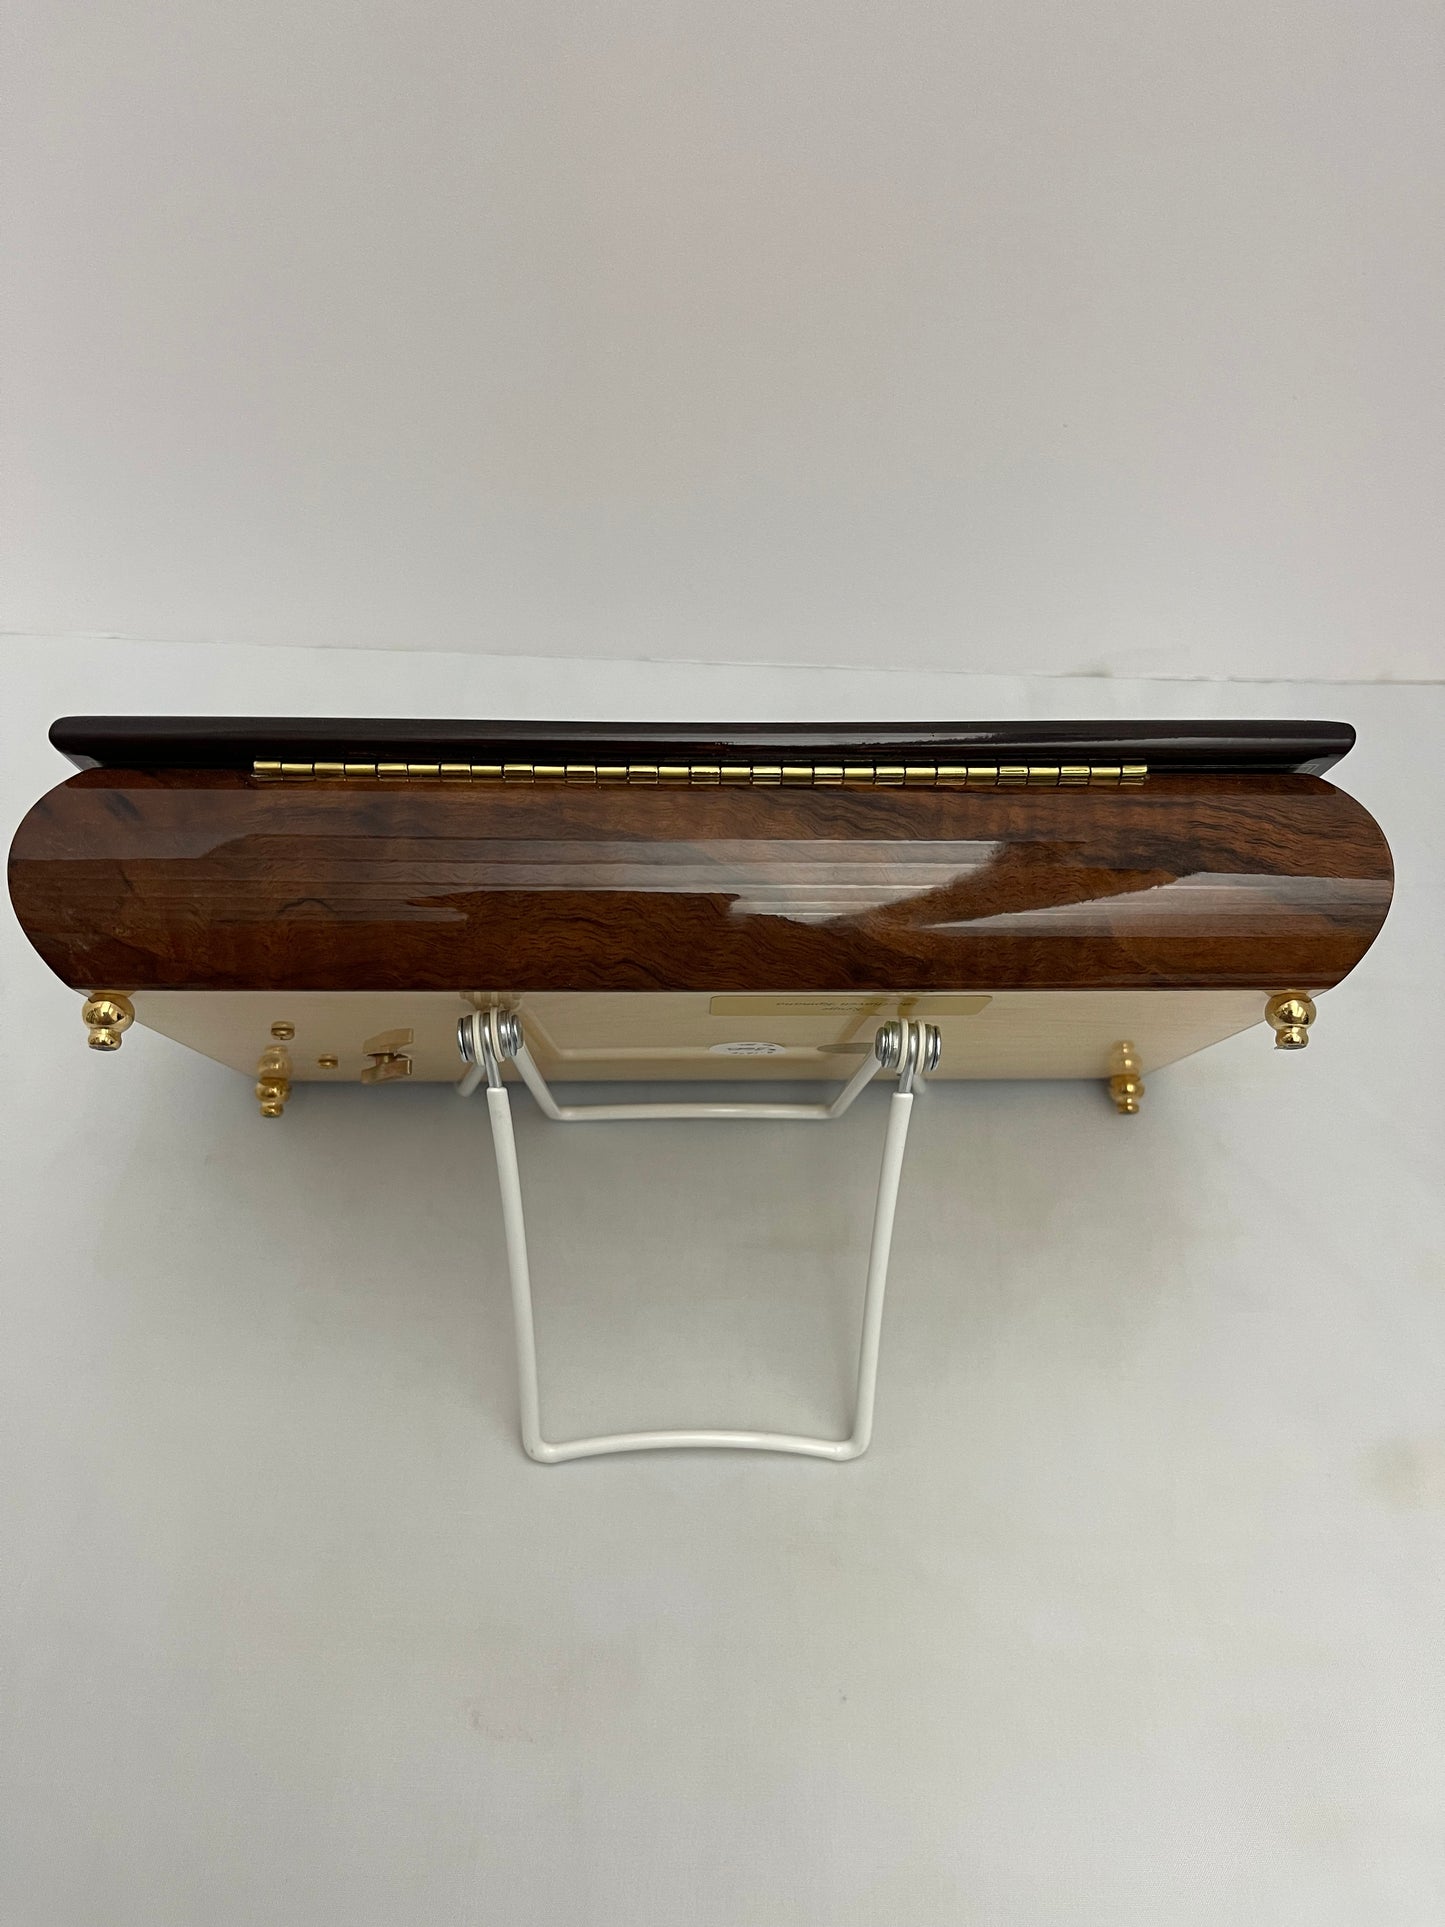 Inlaid Sorrento Italy Music Box Collectible Reuge "Beethoven Romana" Tune